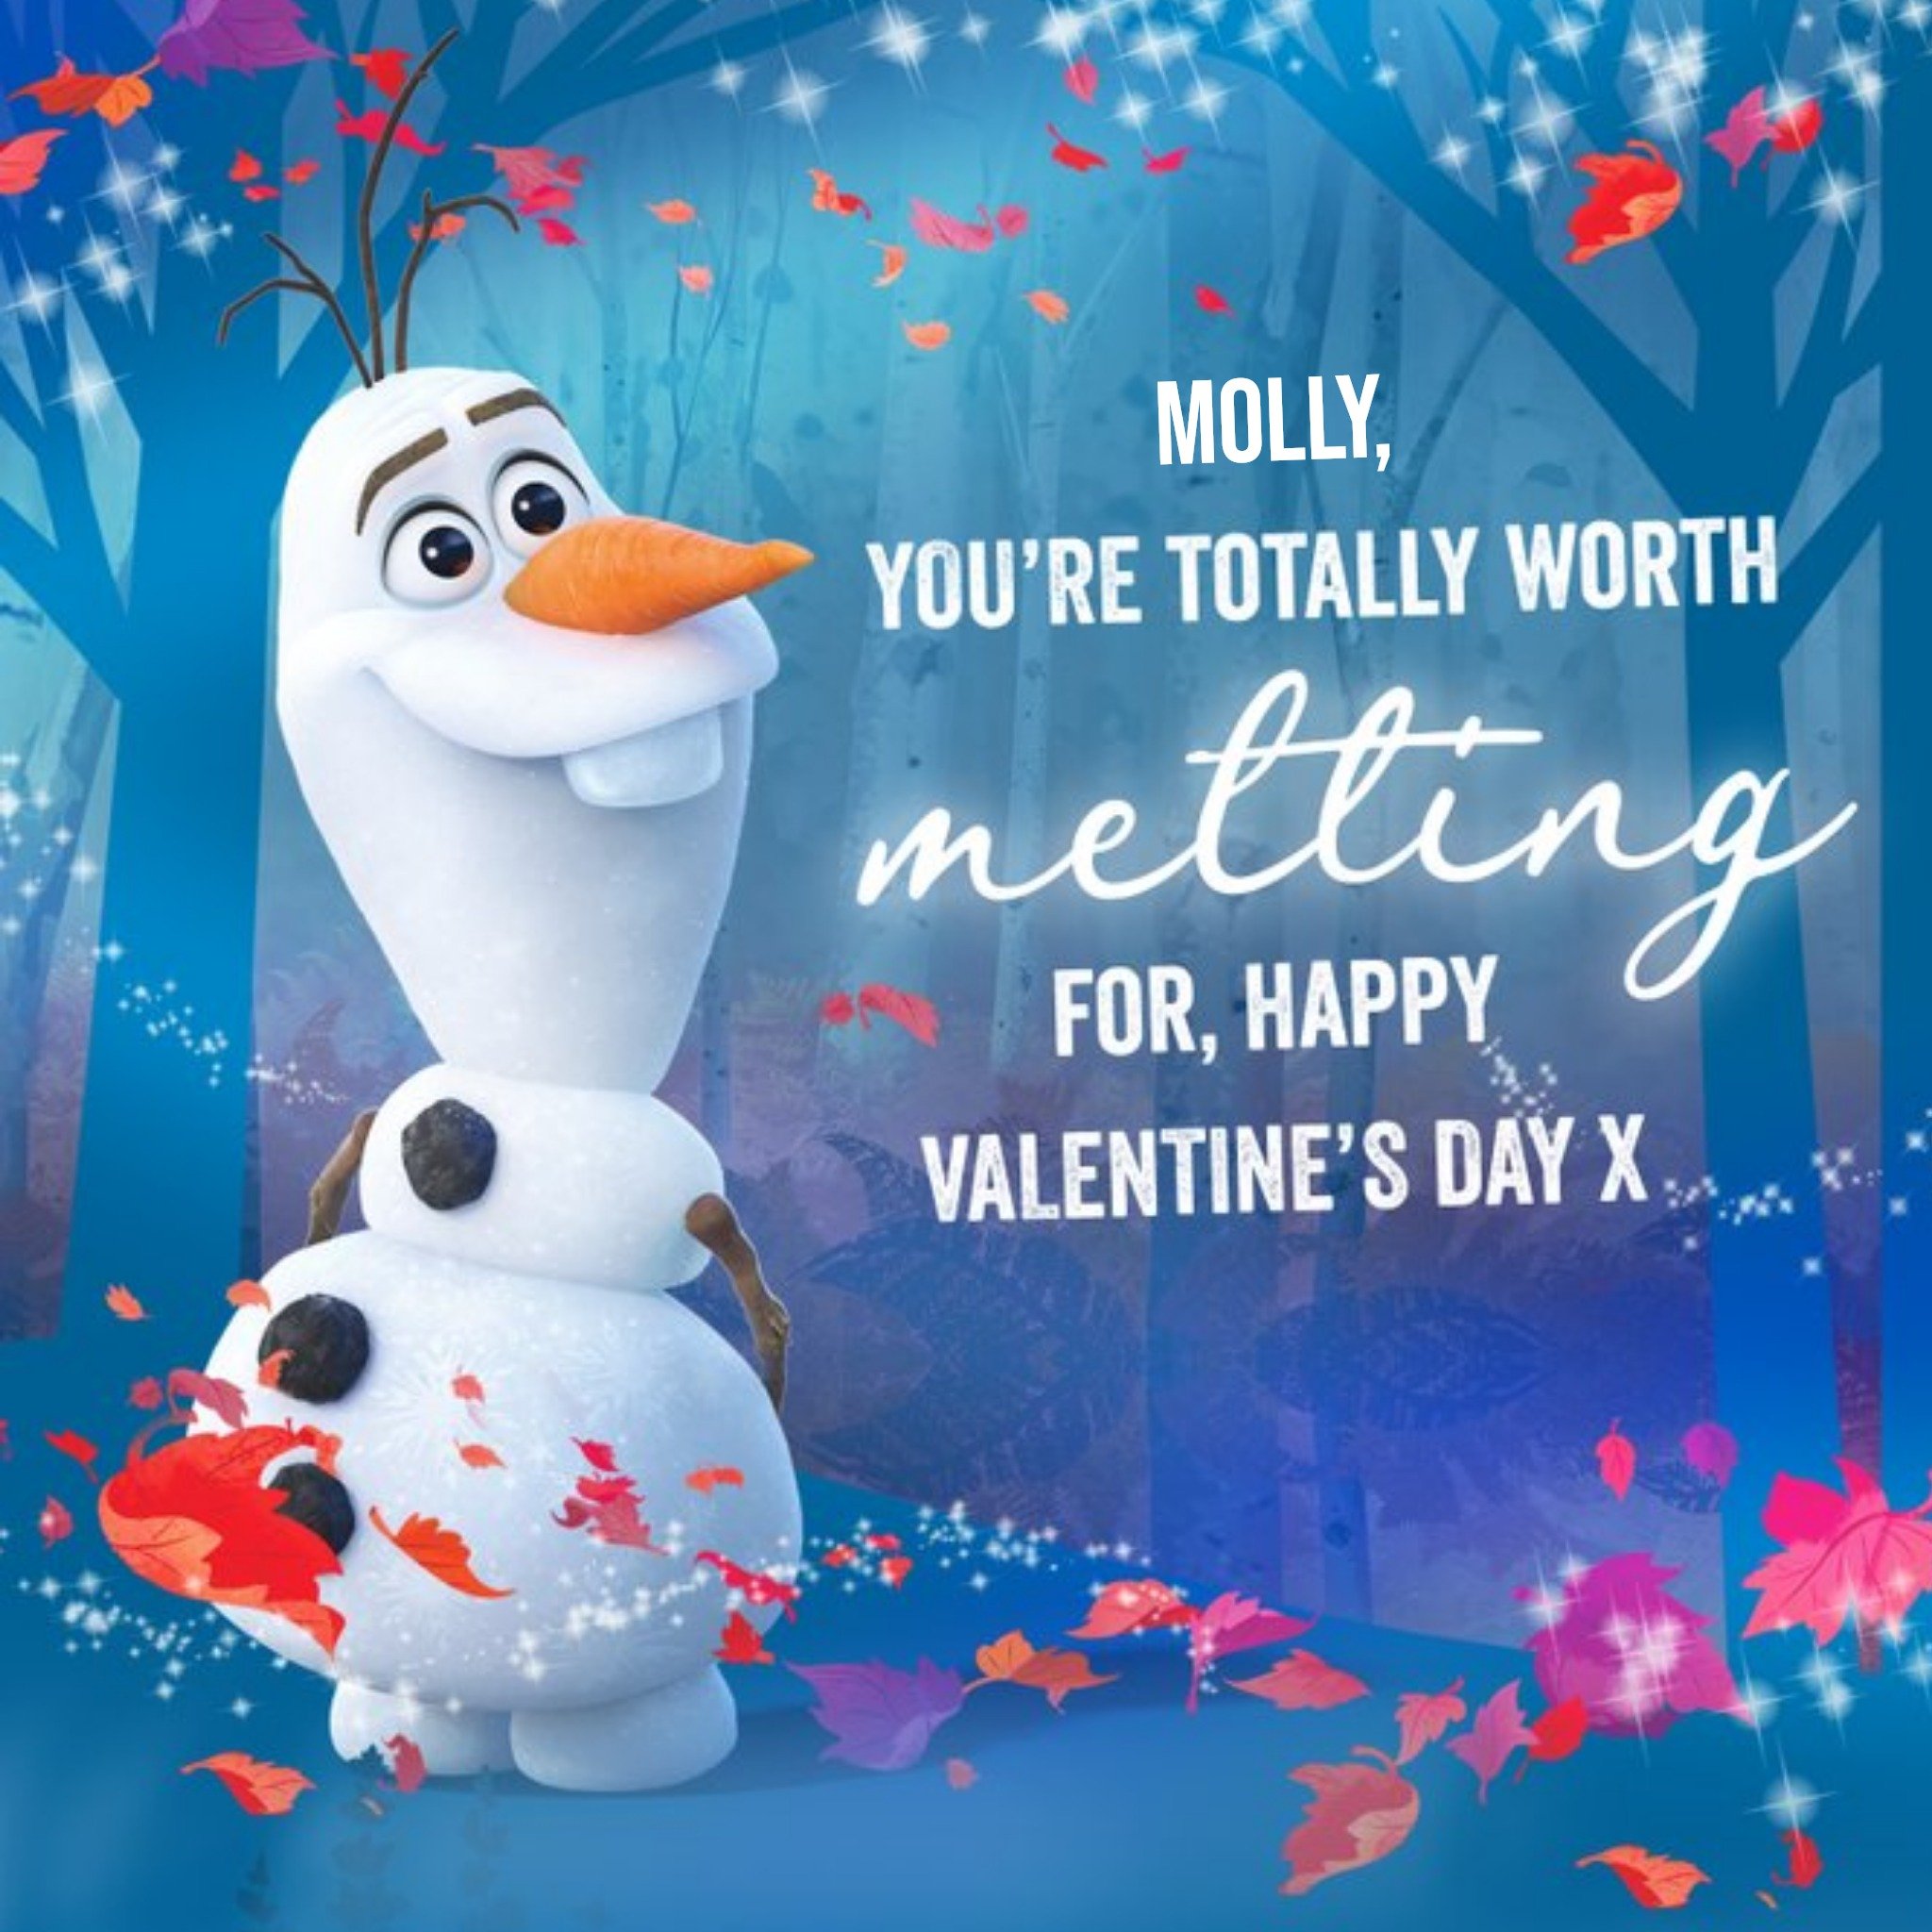 Disney Frozen 2 Olaf You're Worth Melting For Valentine's Day Card, Square